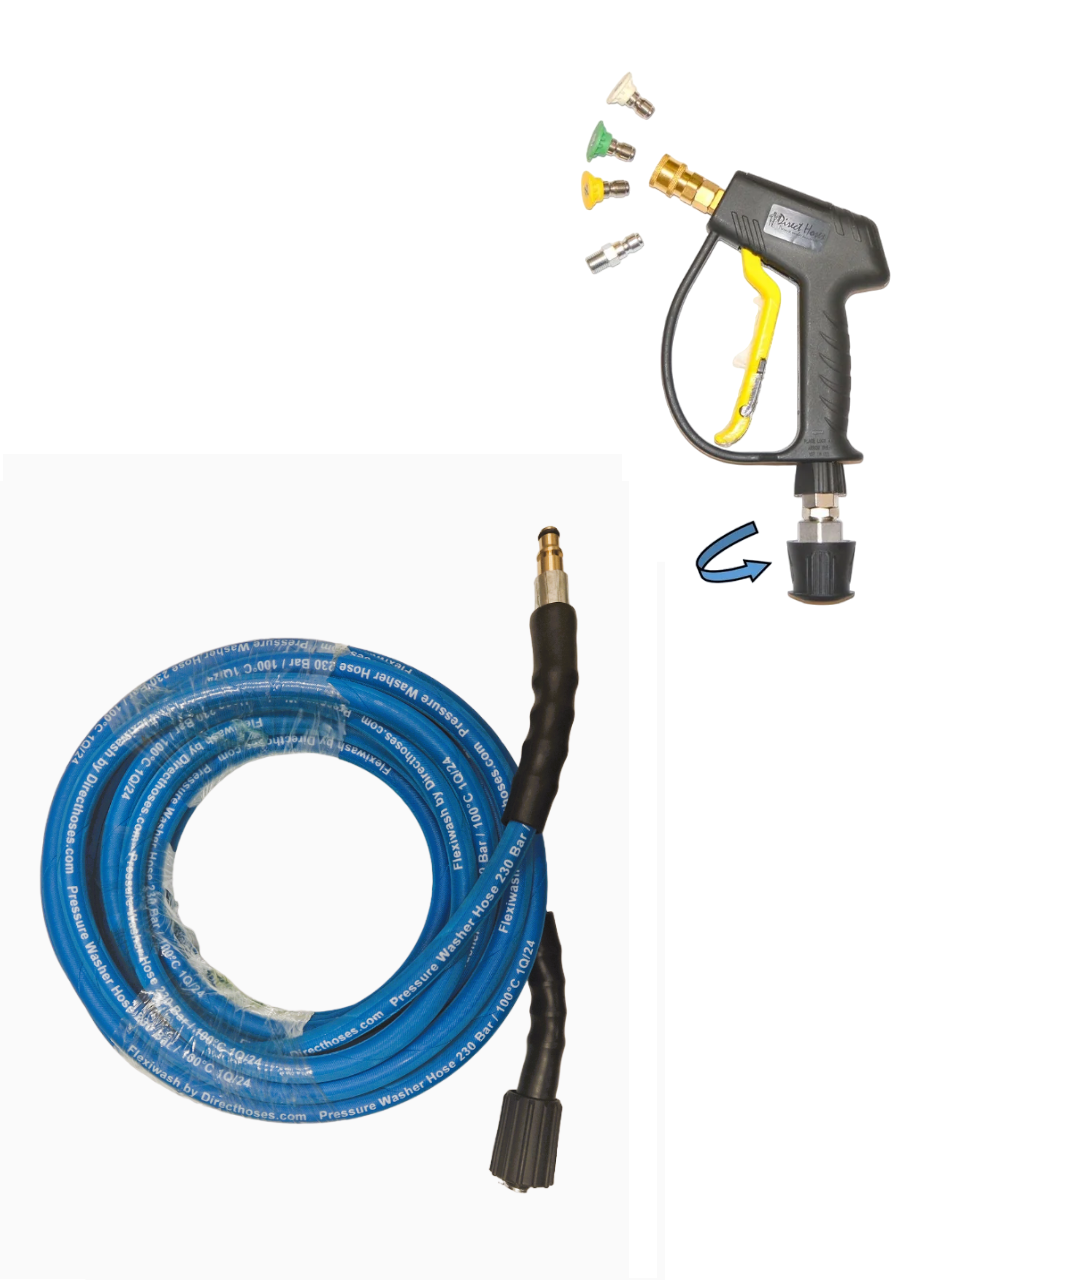 Titan ( Screwfix ) TTB669PRW Rubber Replacement Hose and Short Trigger with Quick fit Nozzles